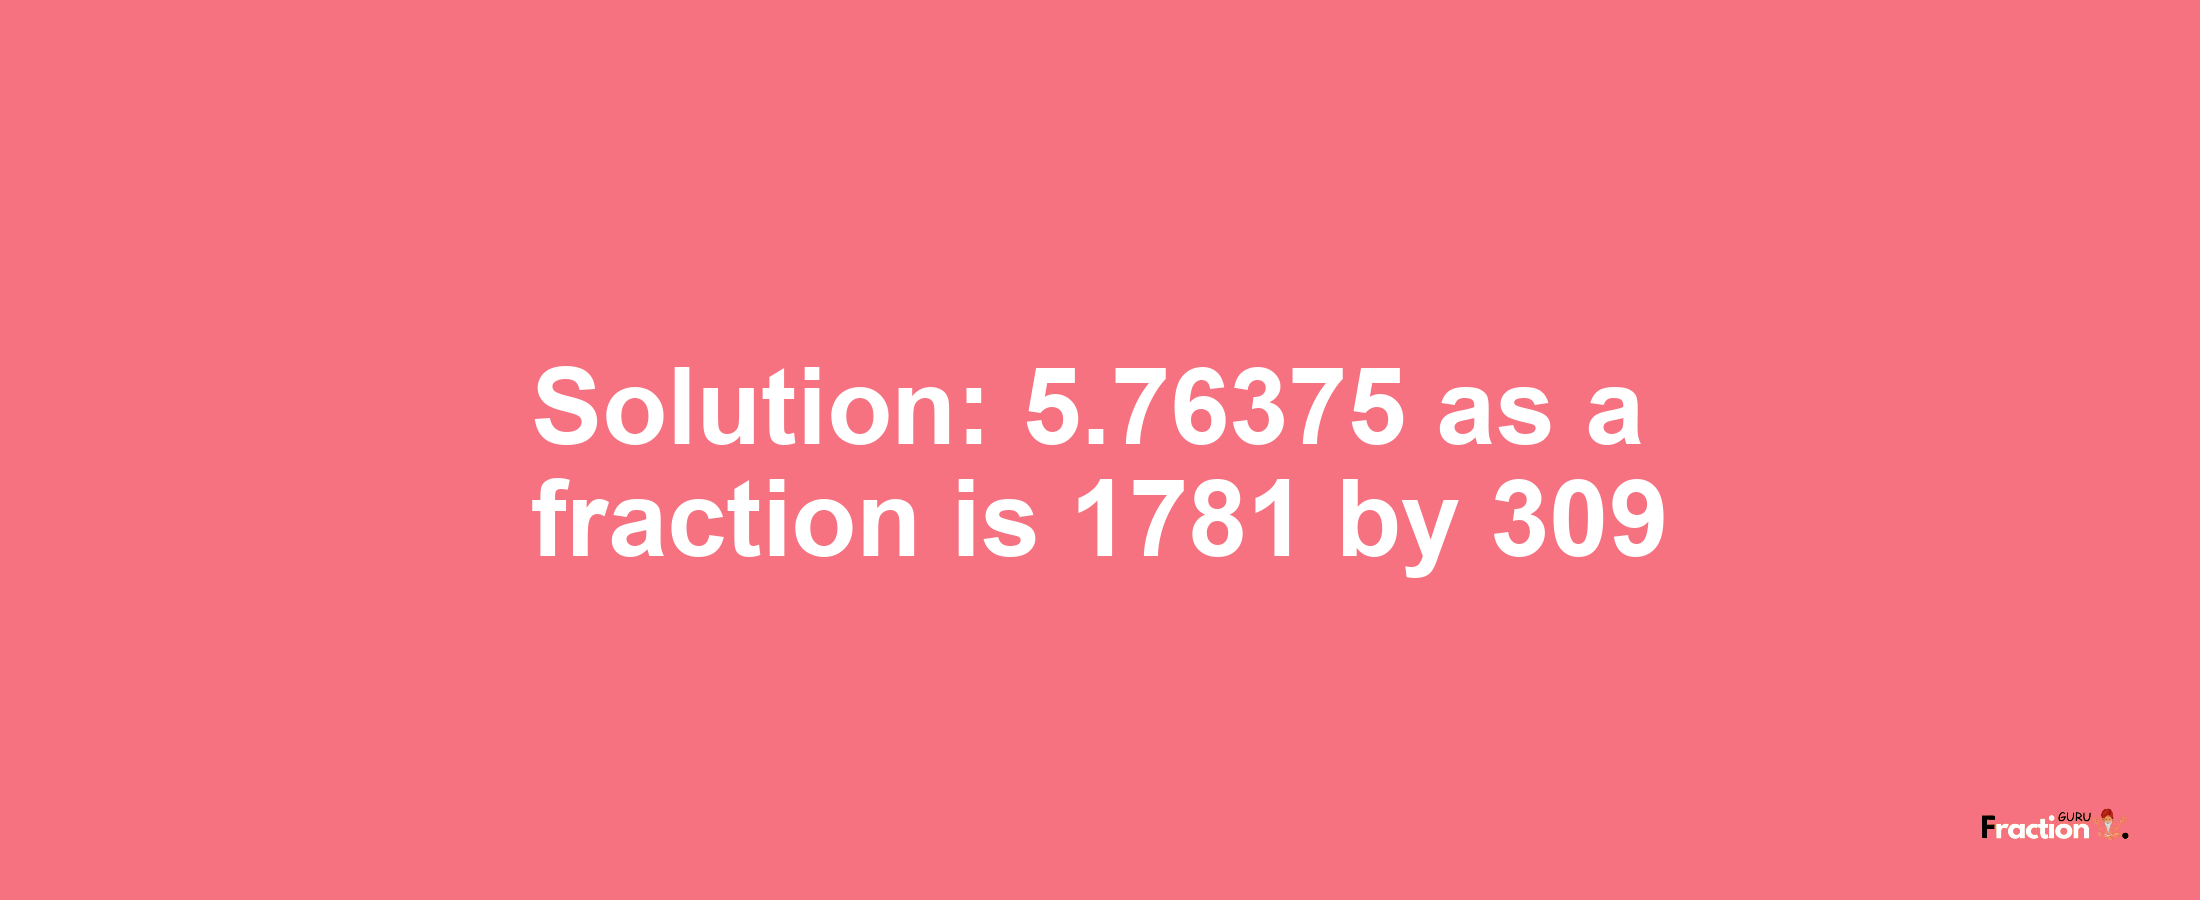 Solution:5.76375 as a fraction is 1781/309